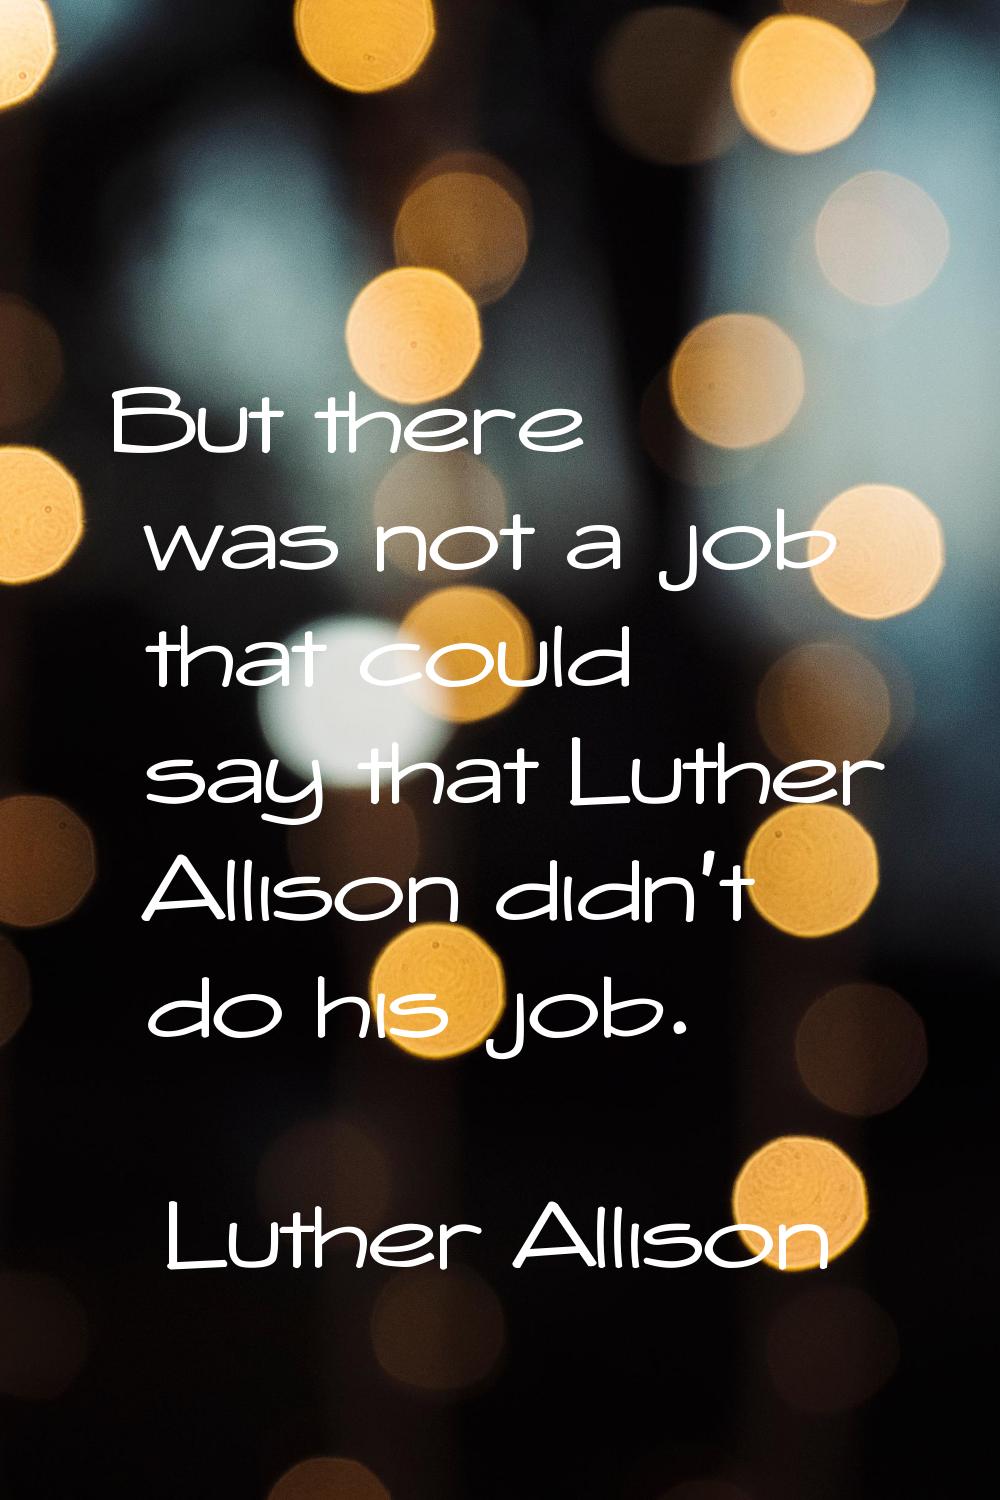 But there was not a job that could say that Luther Allison didn't do his job.